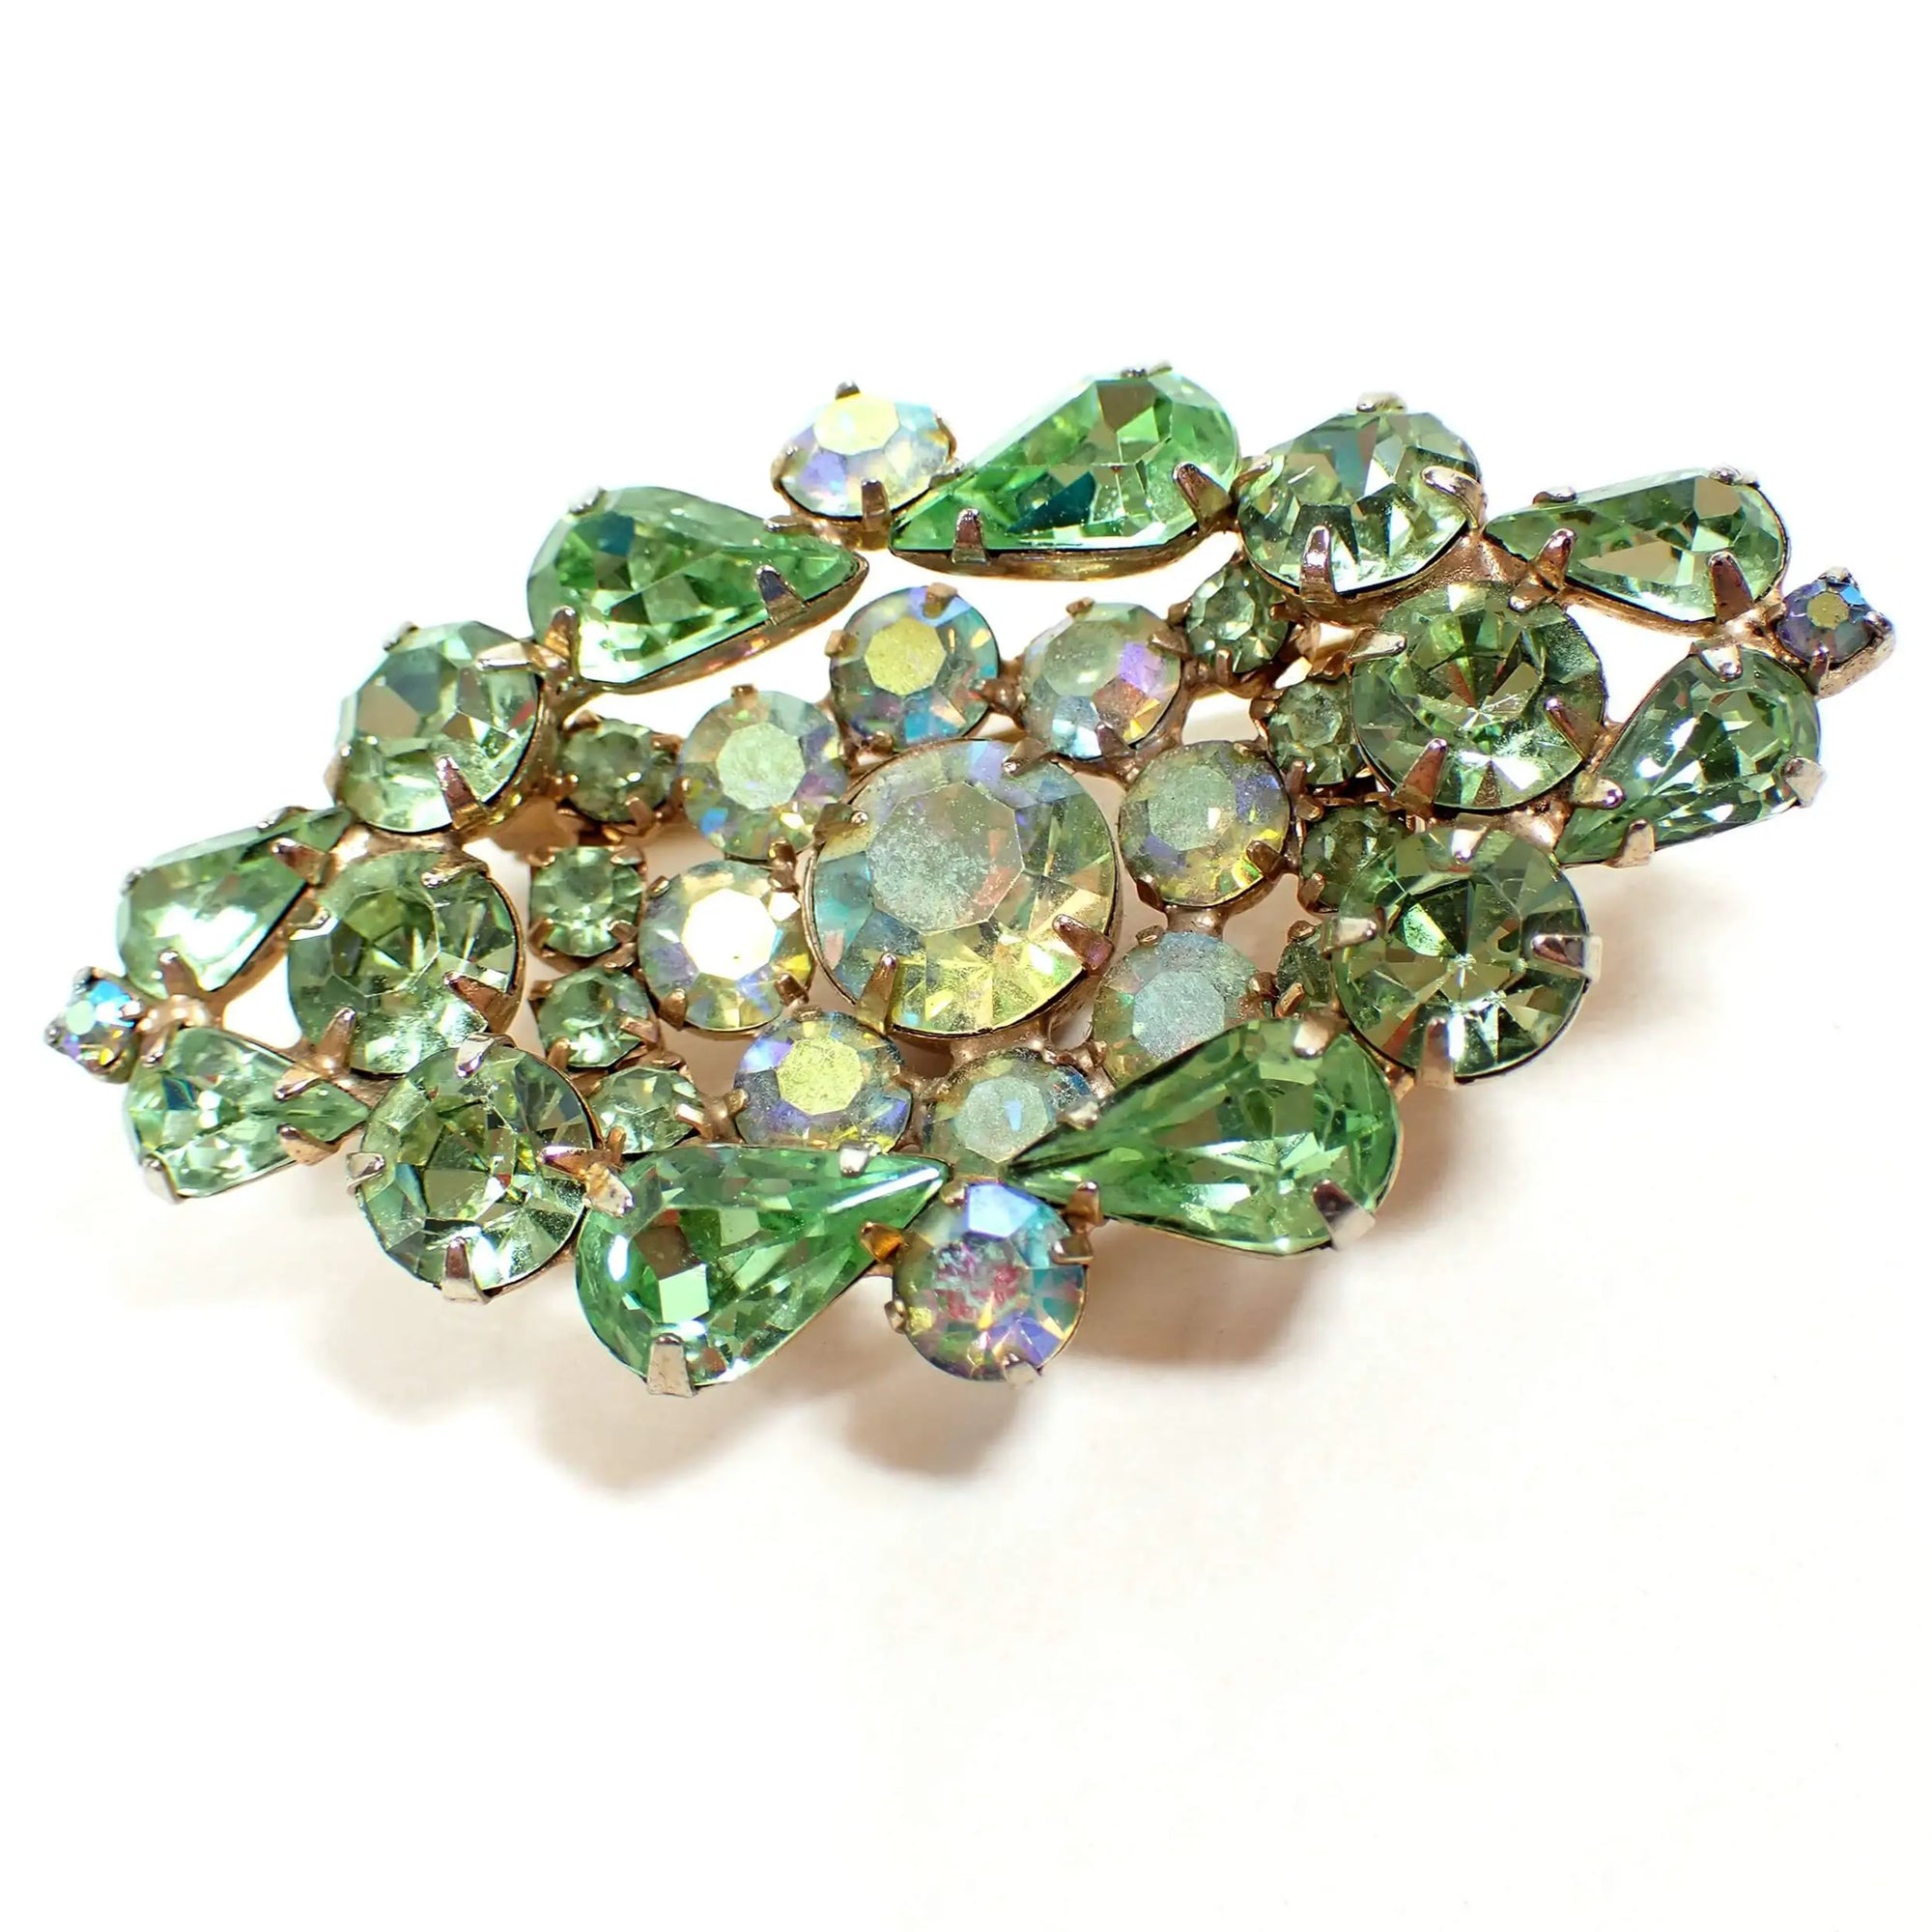 Front view of the Mid Century vintage Weiss crystal rhinestone brooch pin. The metal is gold tone in color and it is shaped like a tiered wide diamond shape. There are green teardrop and round rhinestones and AB round green rhinestones making up the entire front of the brooch.